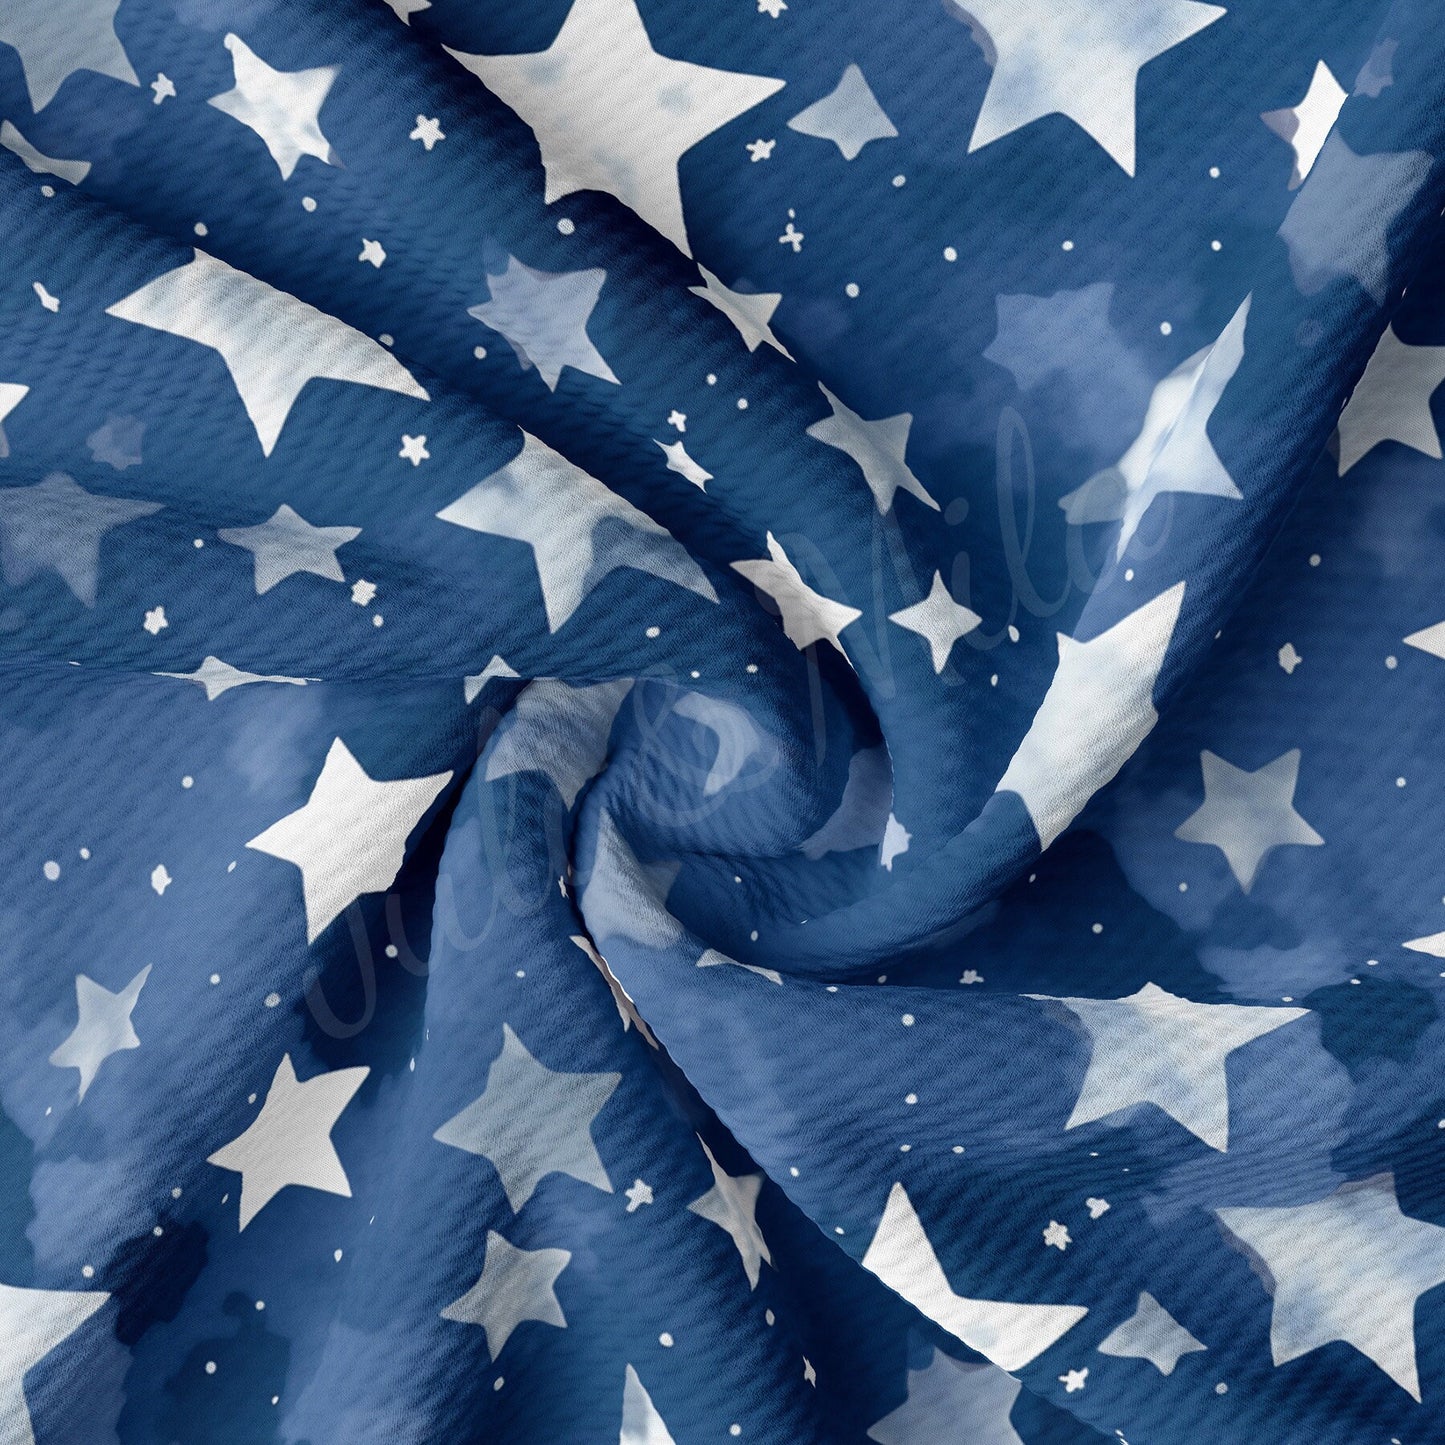 Patriotic 4th of July Bullet Textured Fabric  AA1649